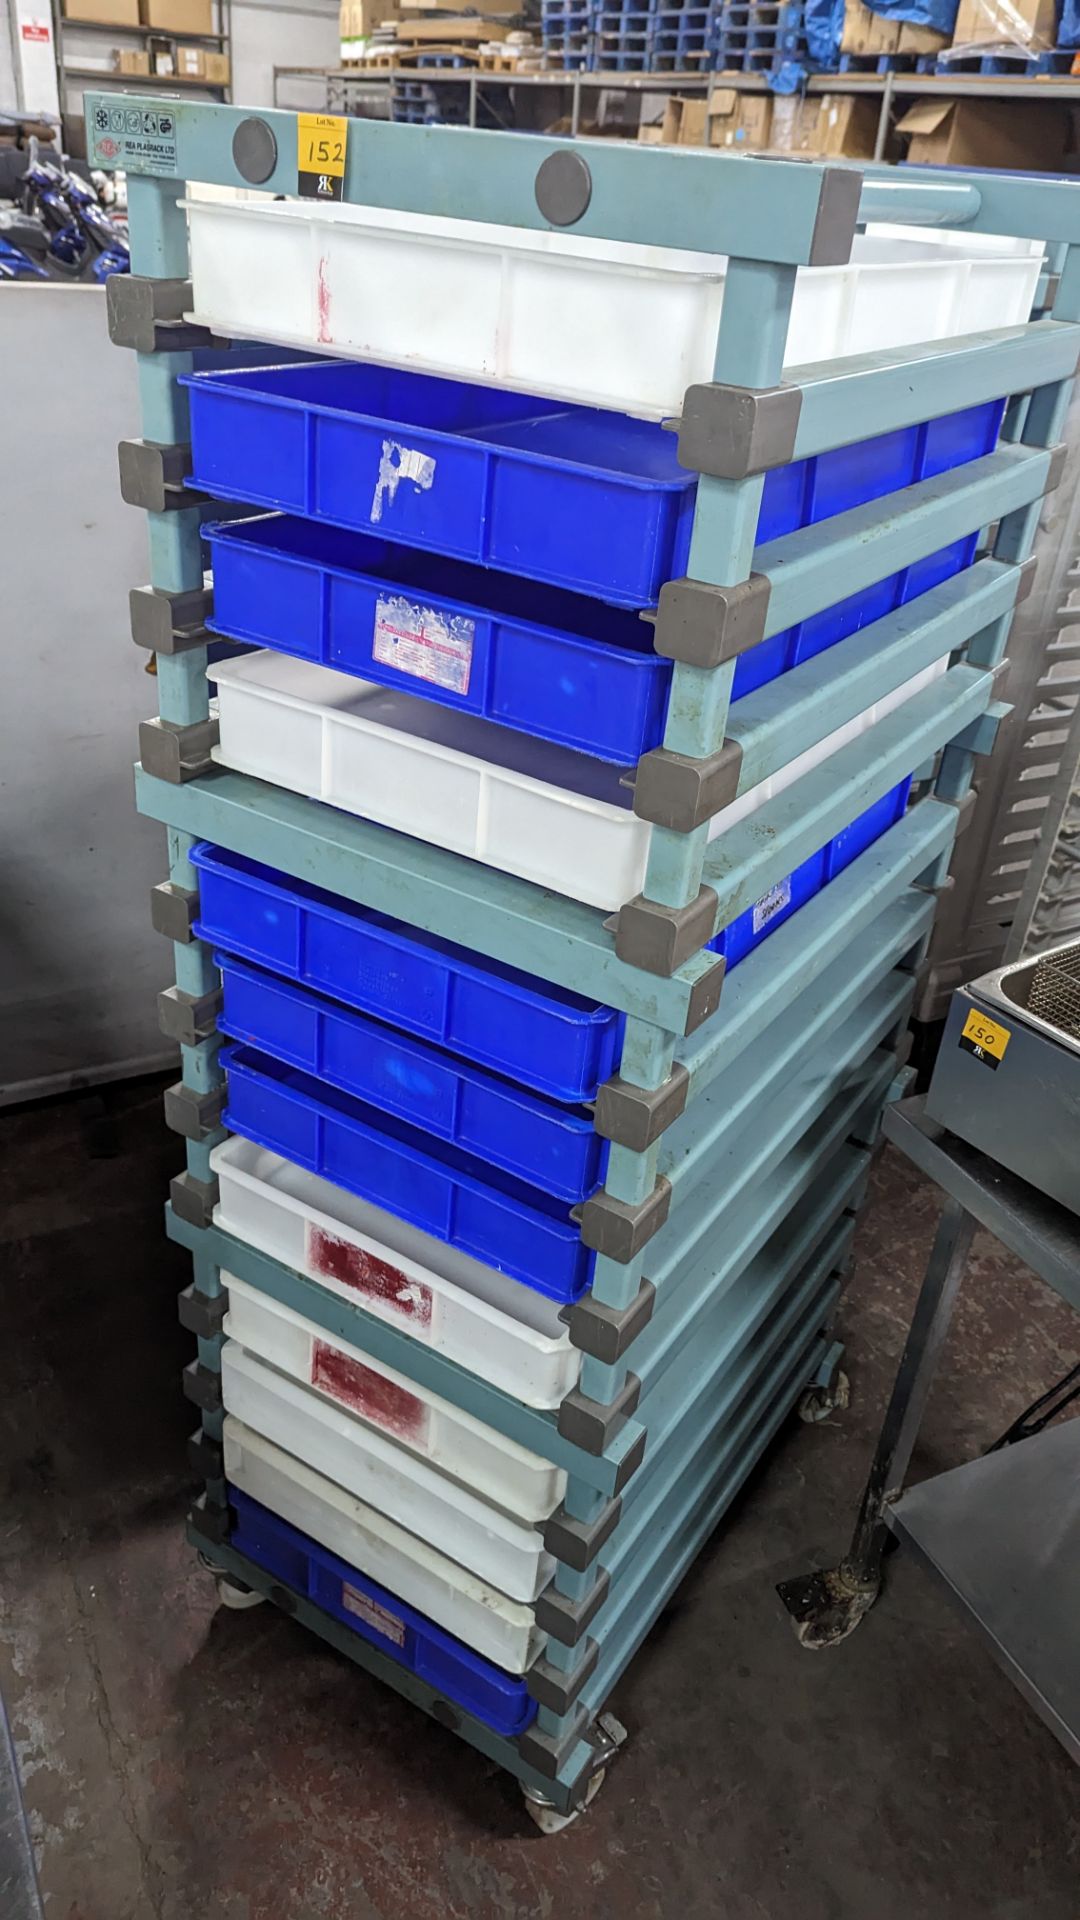 REA Plasrack mobile tray trolley with a capacity for 12 plastic pull-out trays. The trays are model - Image 3 of 3